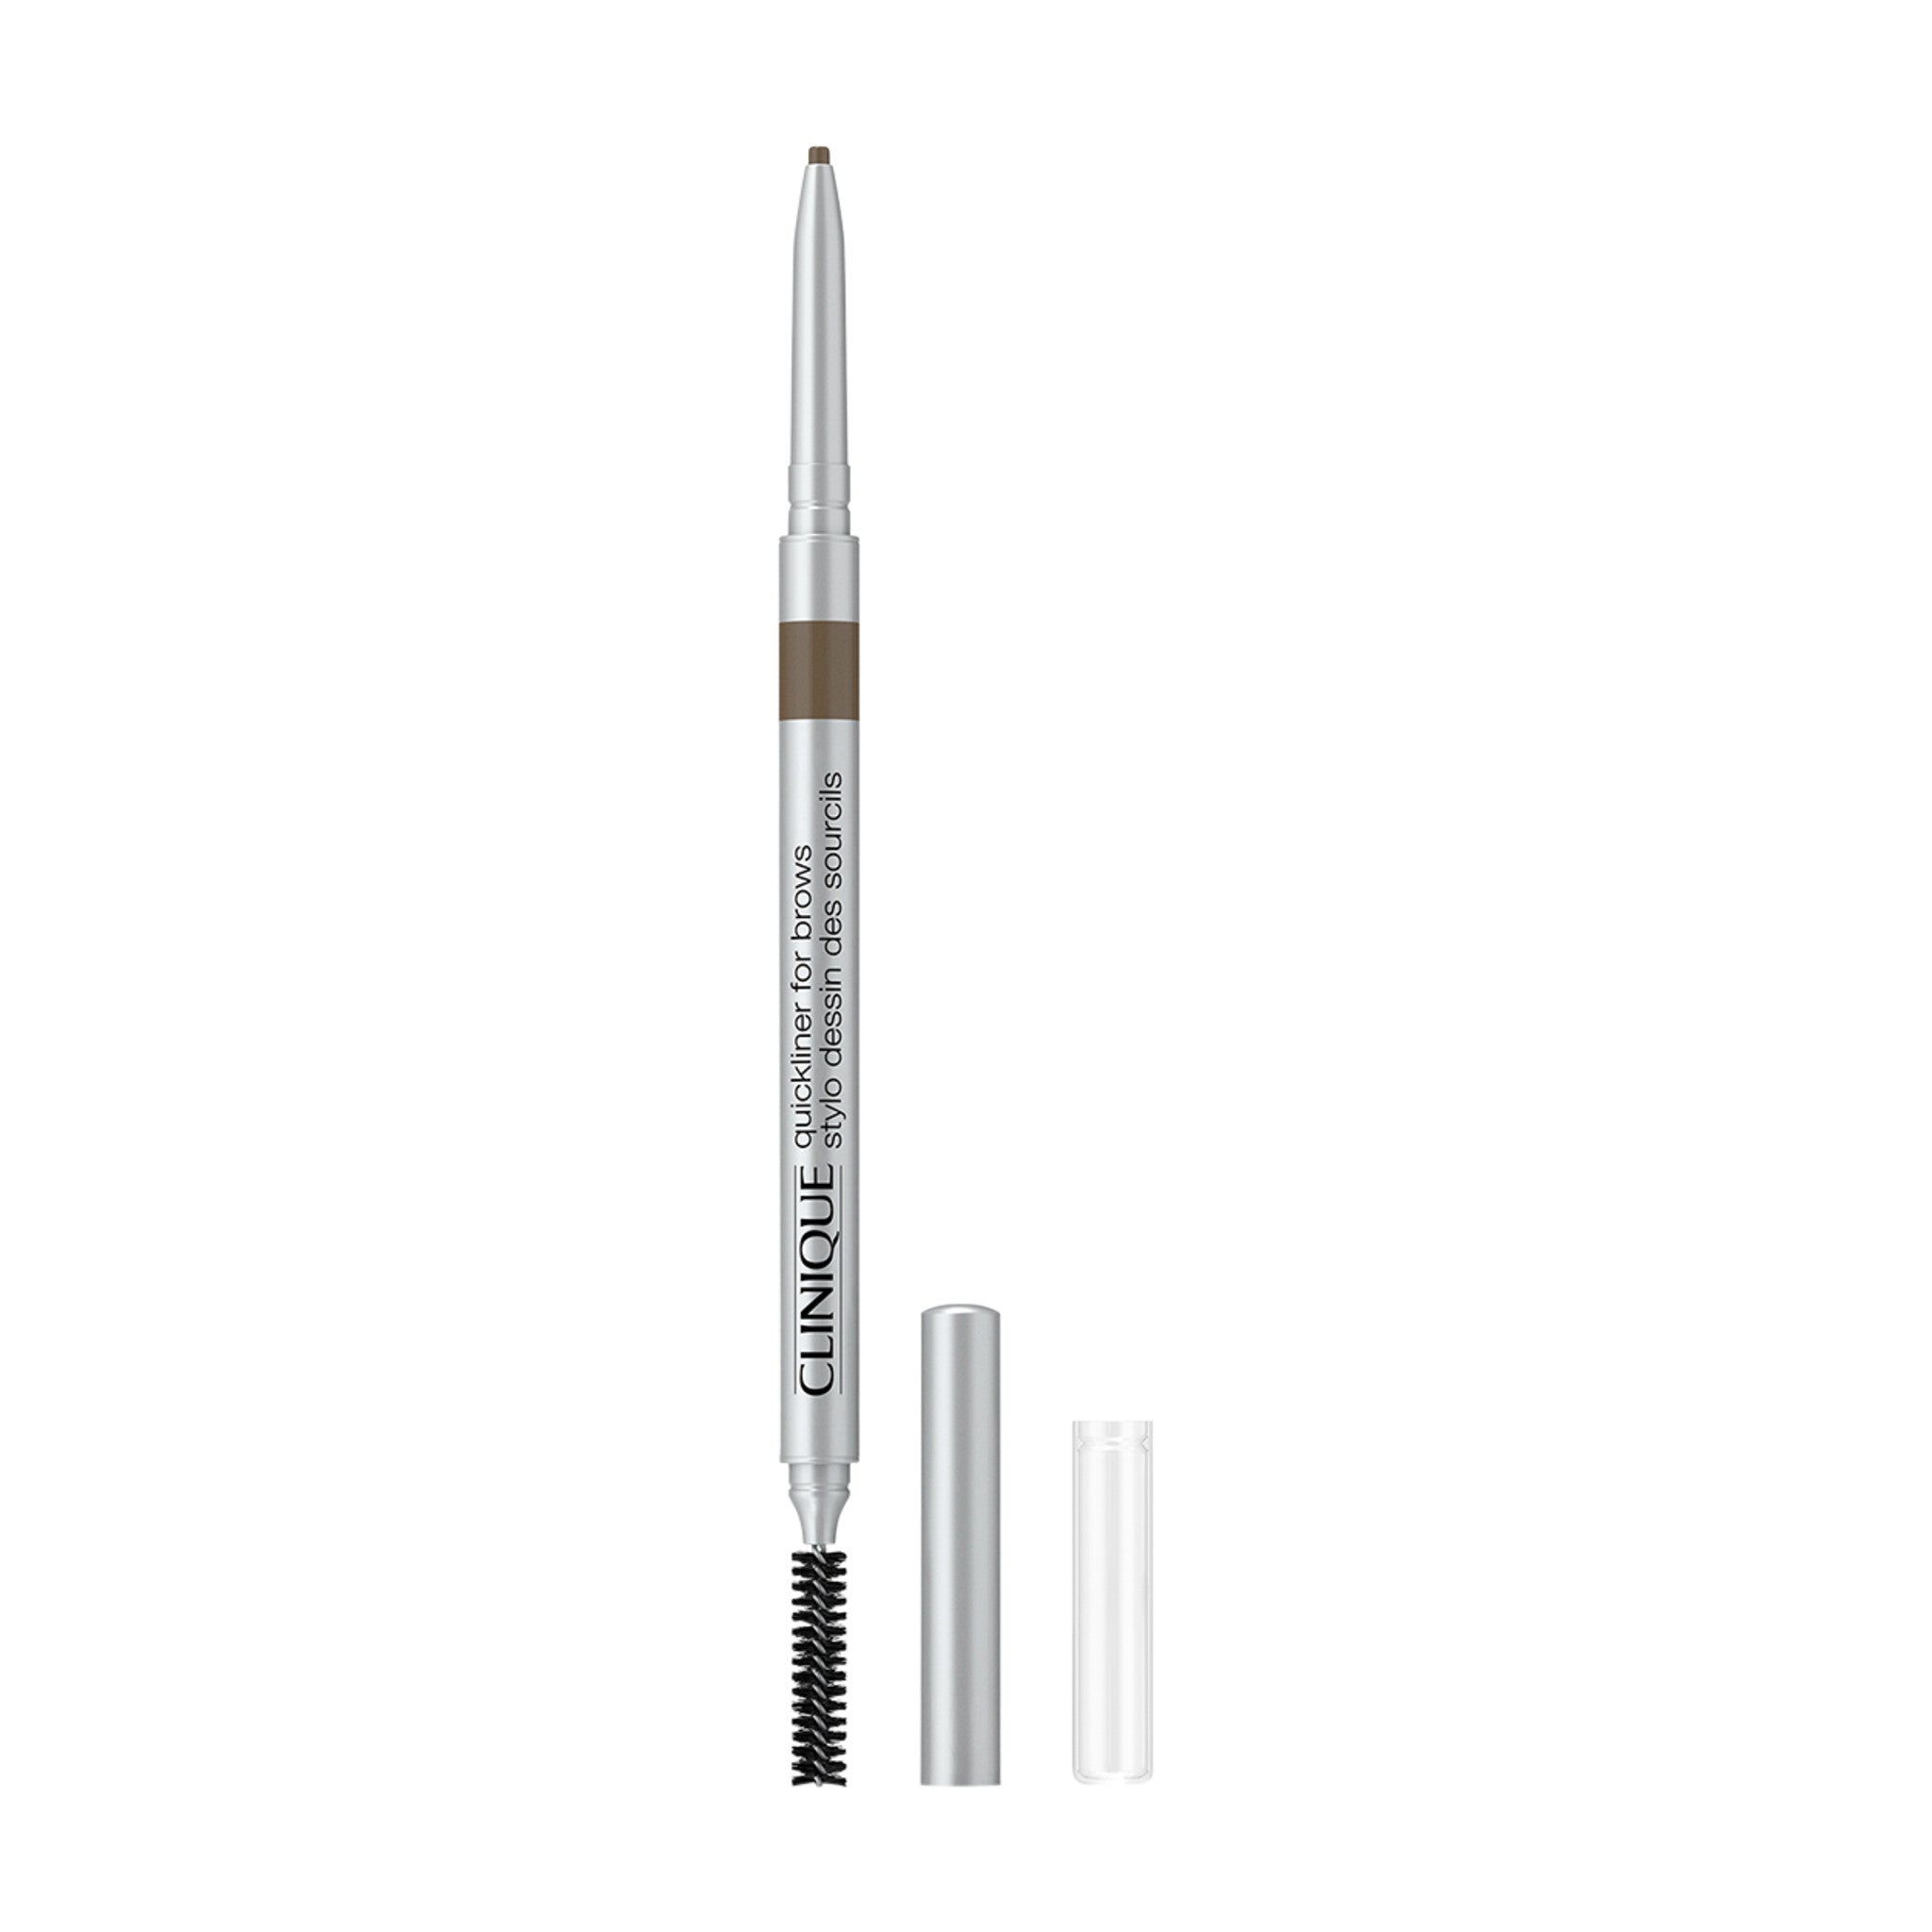 Clinique Quickliner for Brows Color/Shade variant: Soft Brown main image.